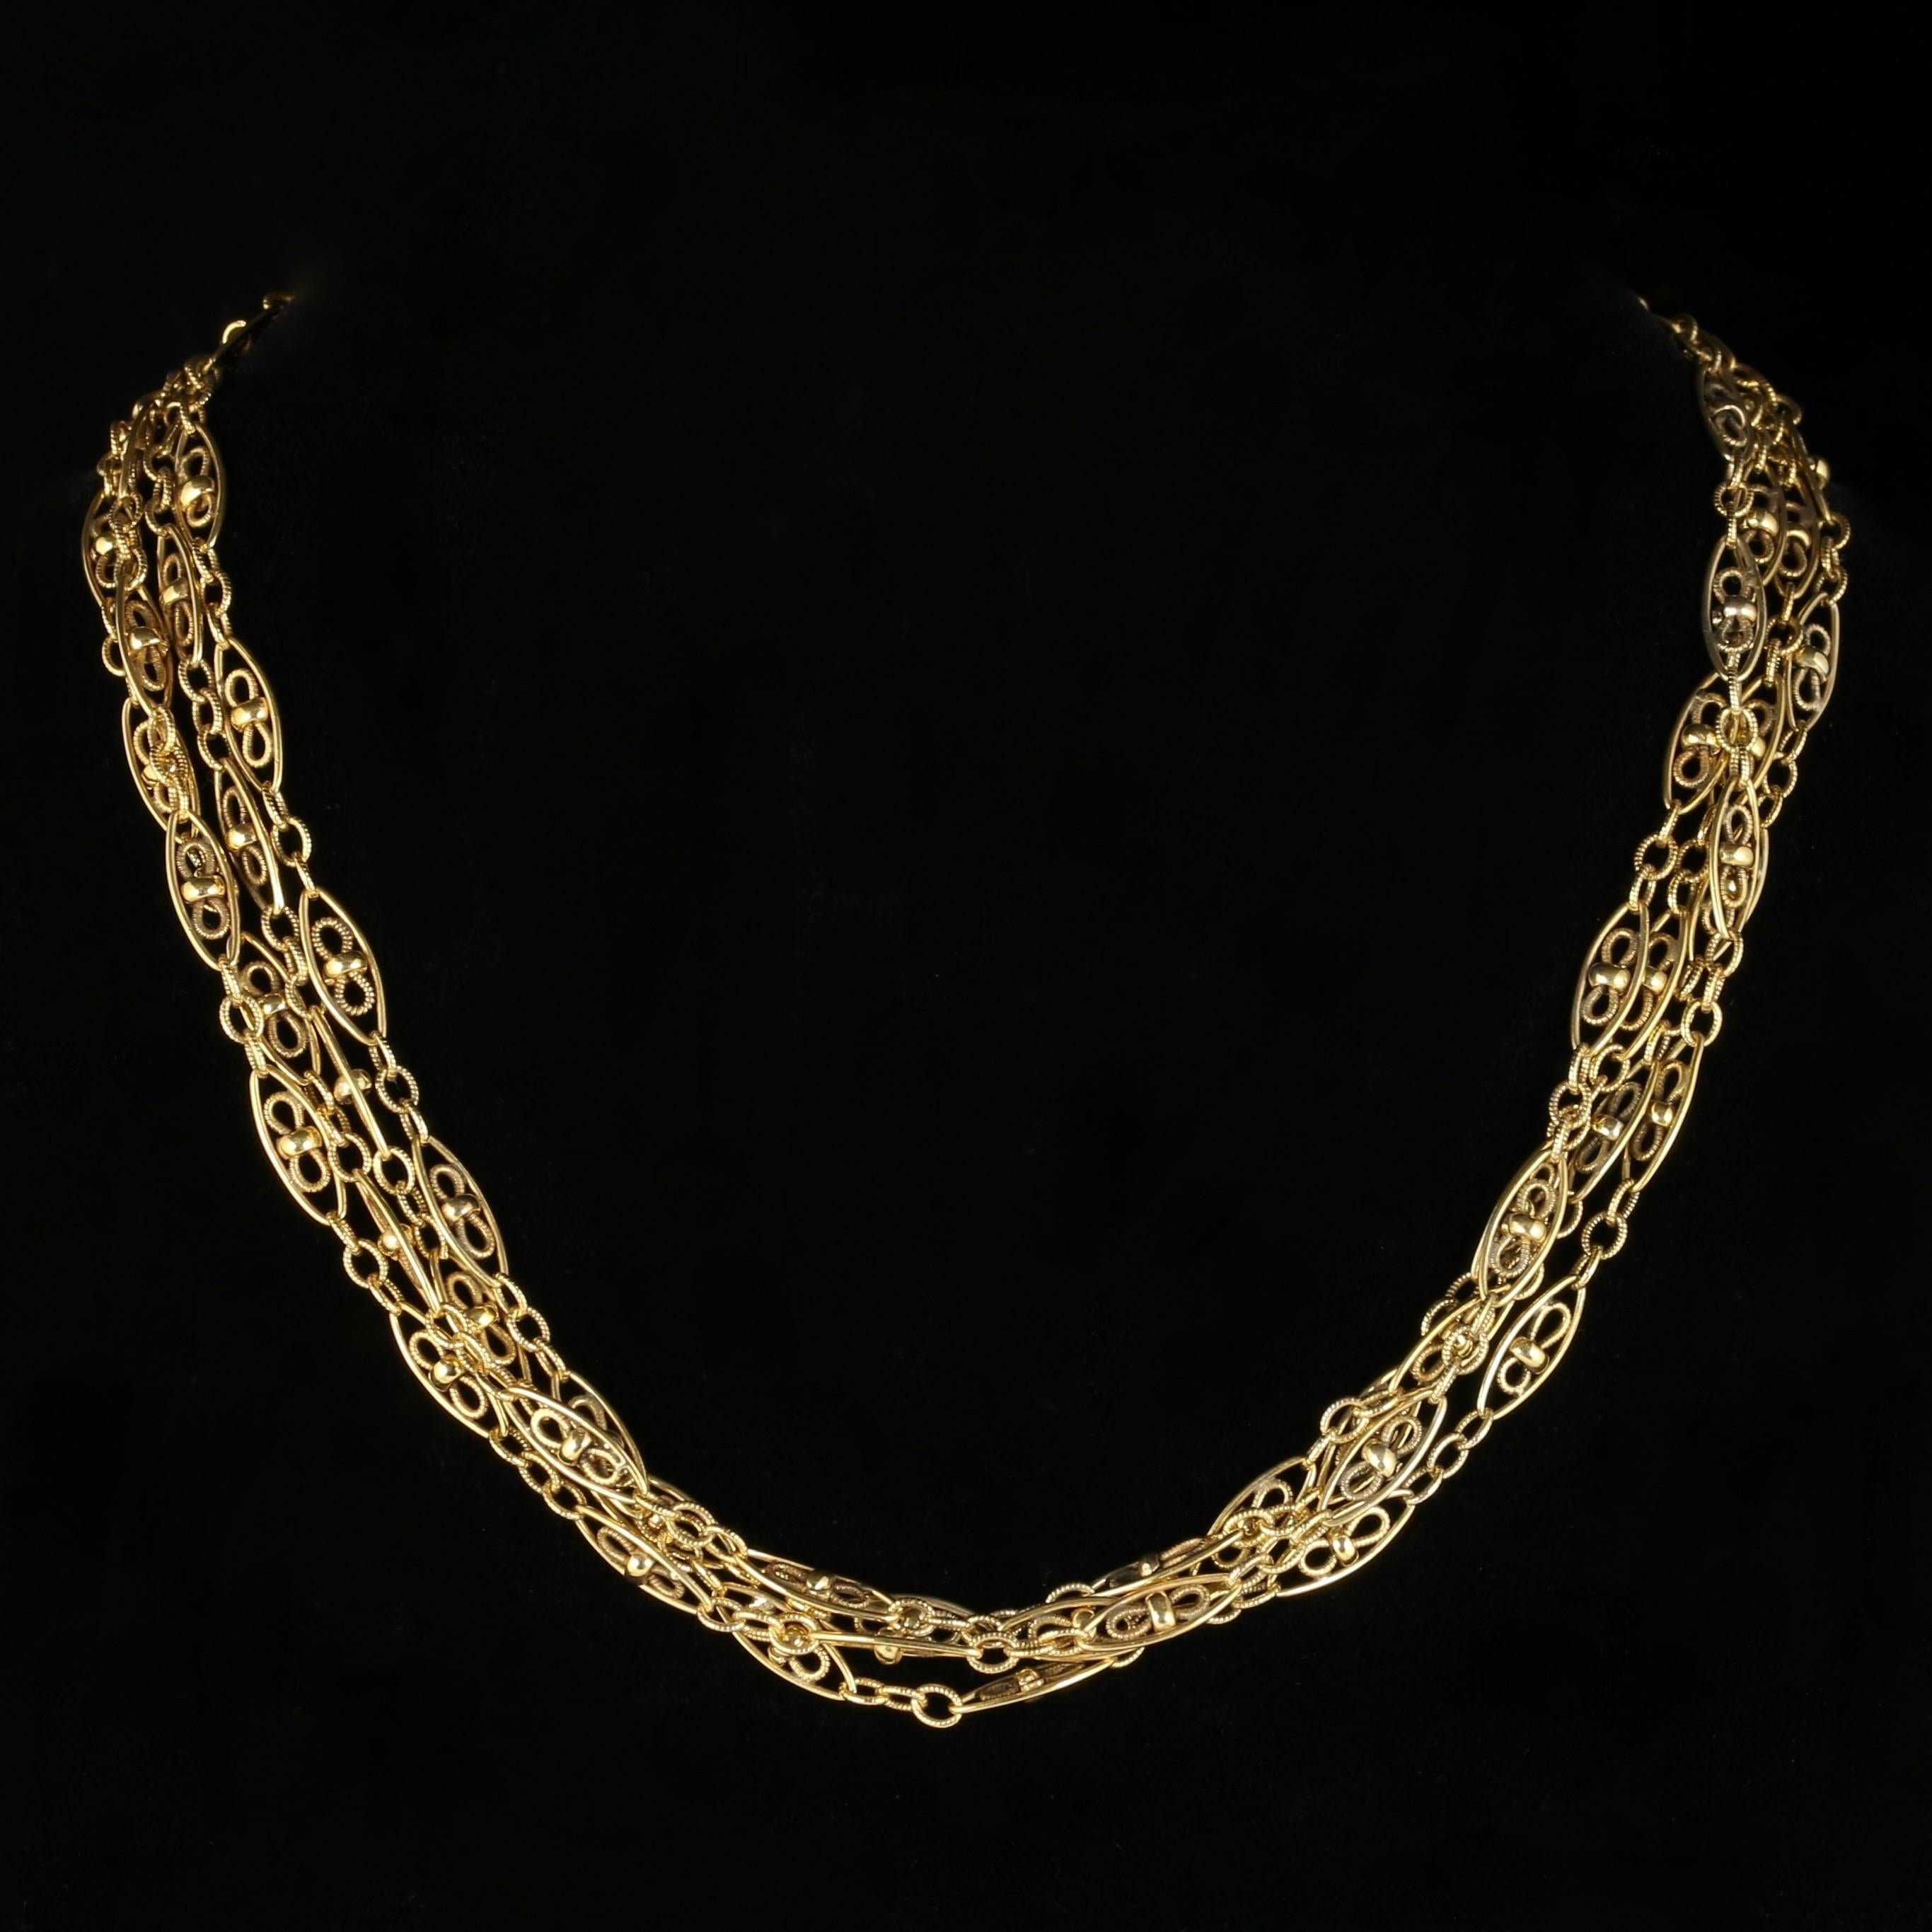 For more details please click continue reading down below...

This fabulous French antique Victorian long chain is set with lovely fancy panels and links. Circa 1900

Set in 18ct Yellow Gold on Silver.

The lovely long chain can be worn at least